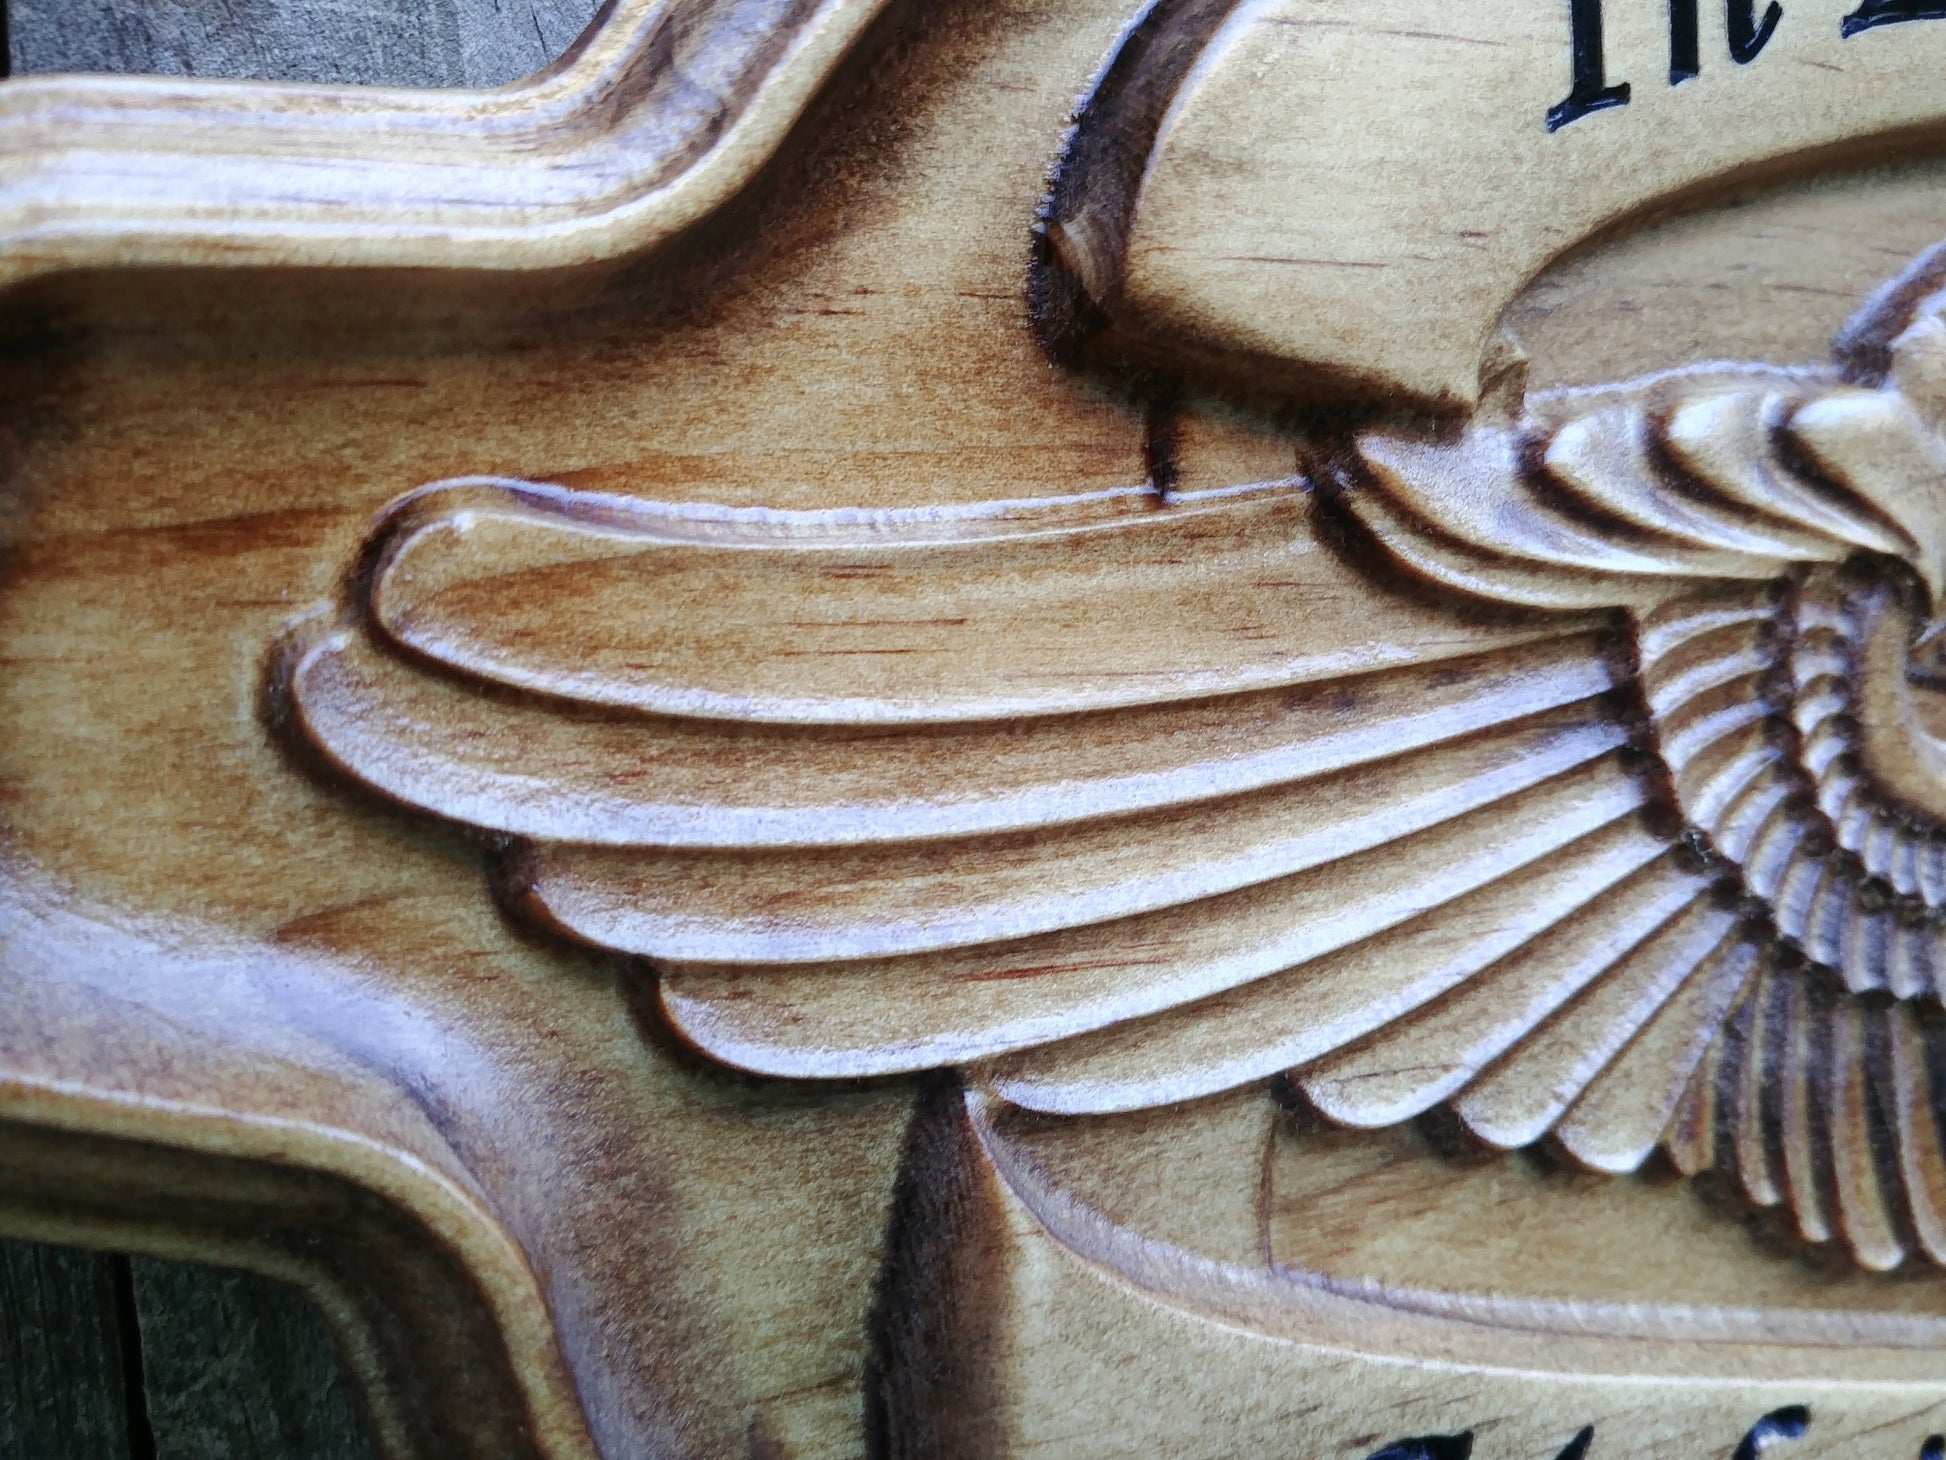 Harley Davidson gifts wood carved sign made in the USA.